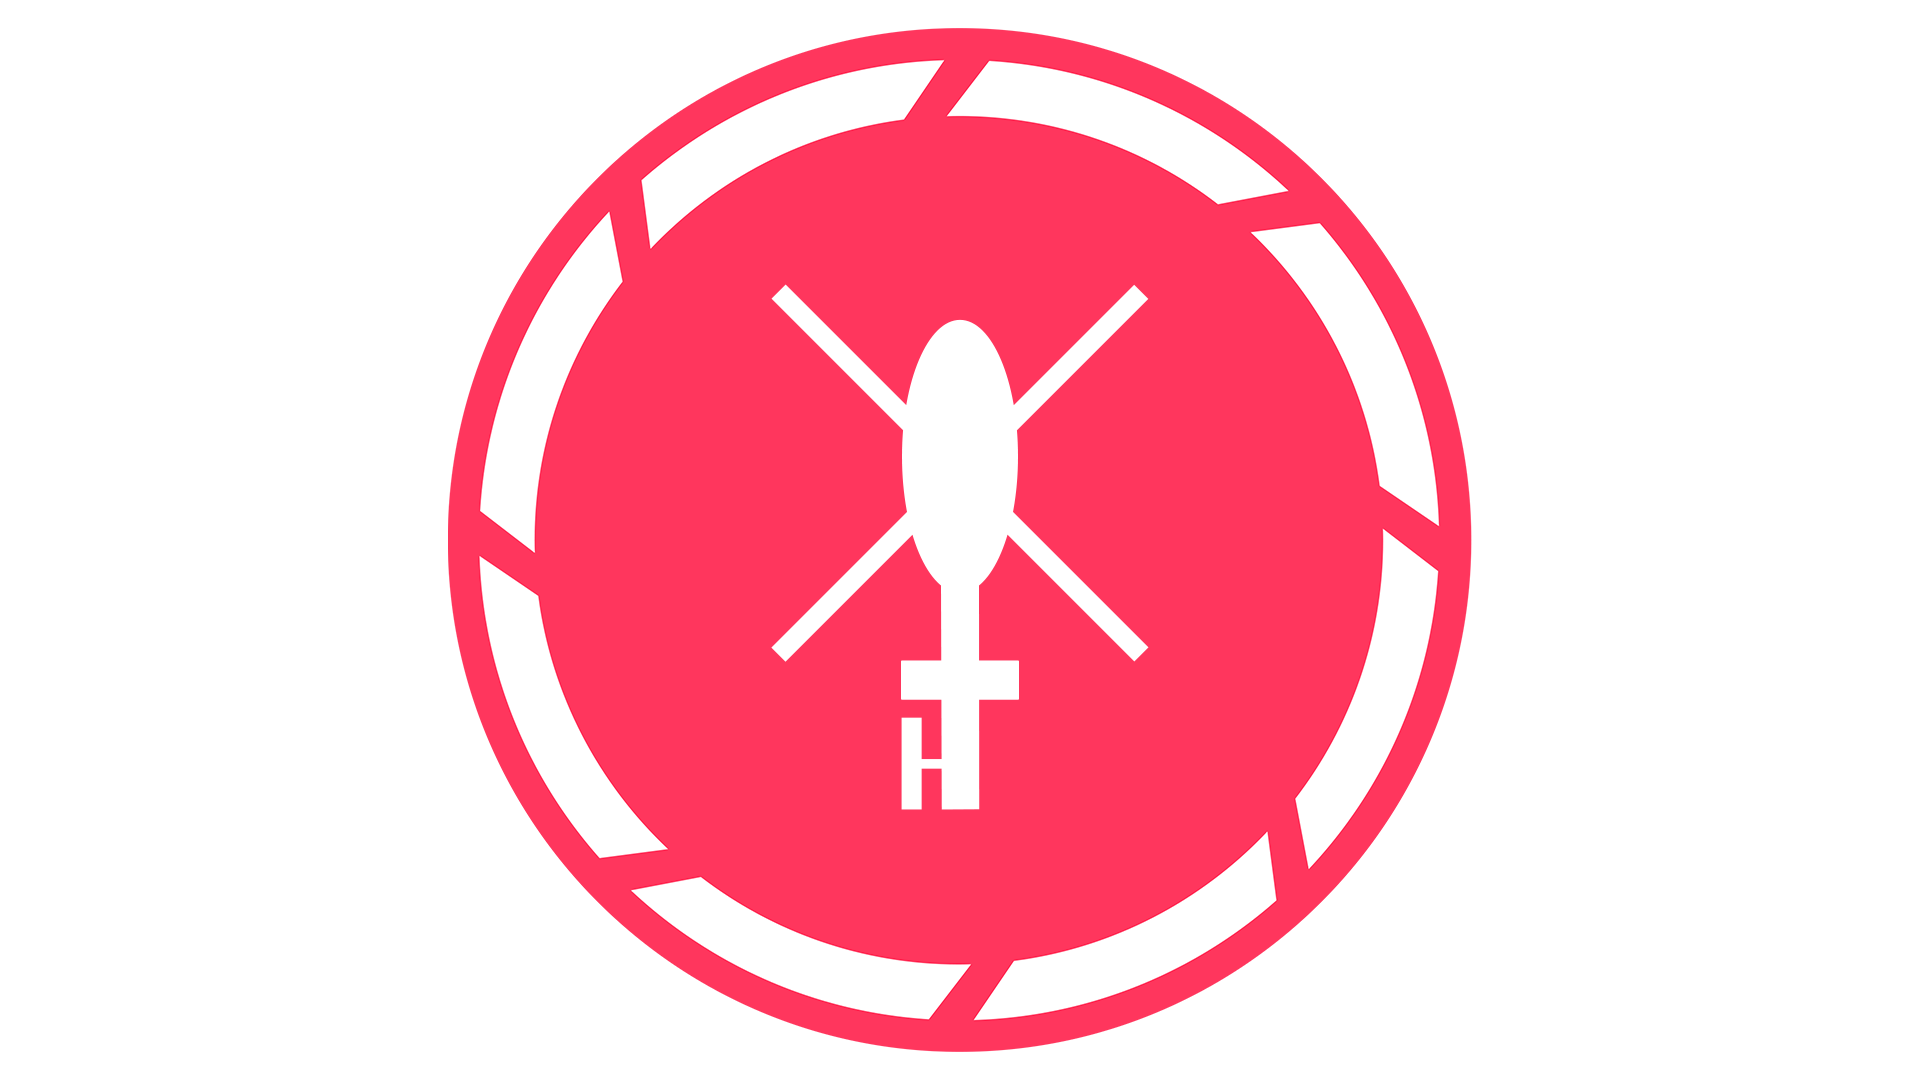 Icon for I Fought the Law